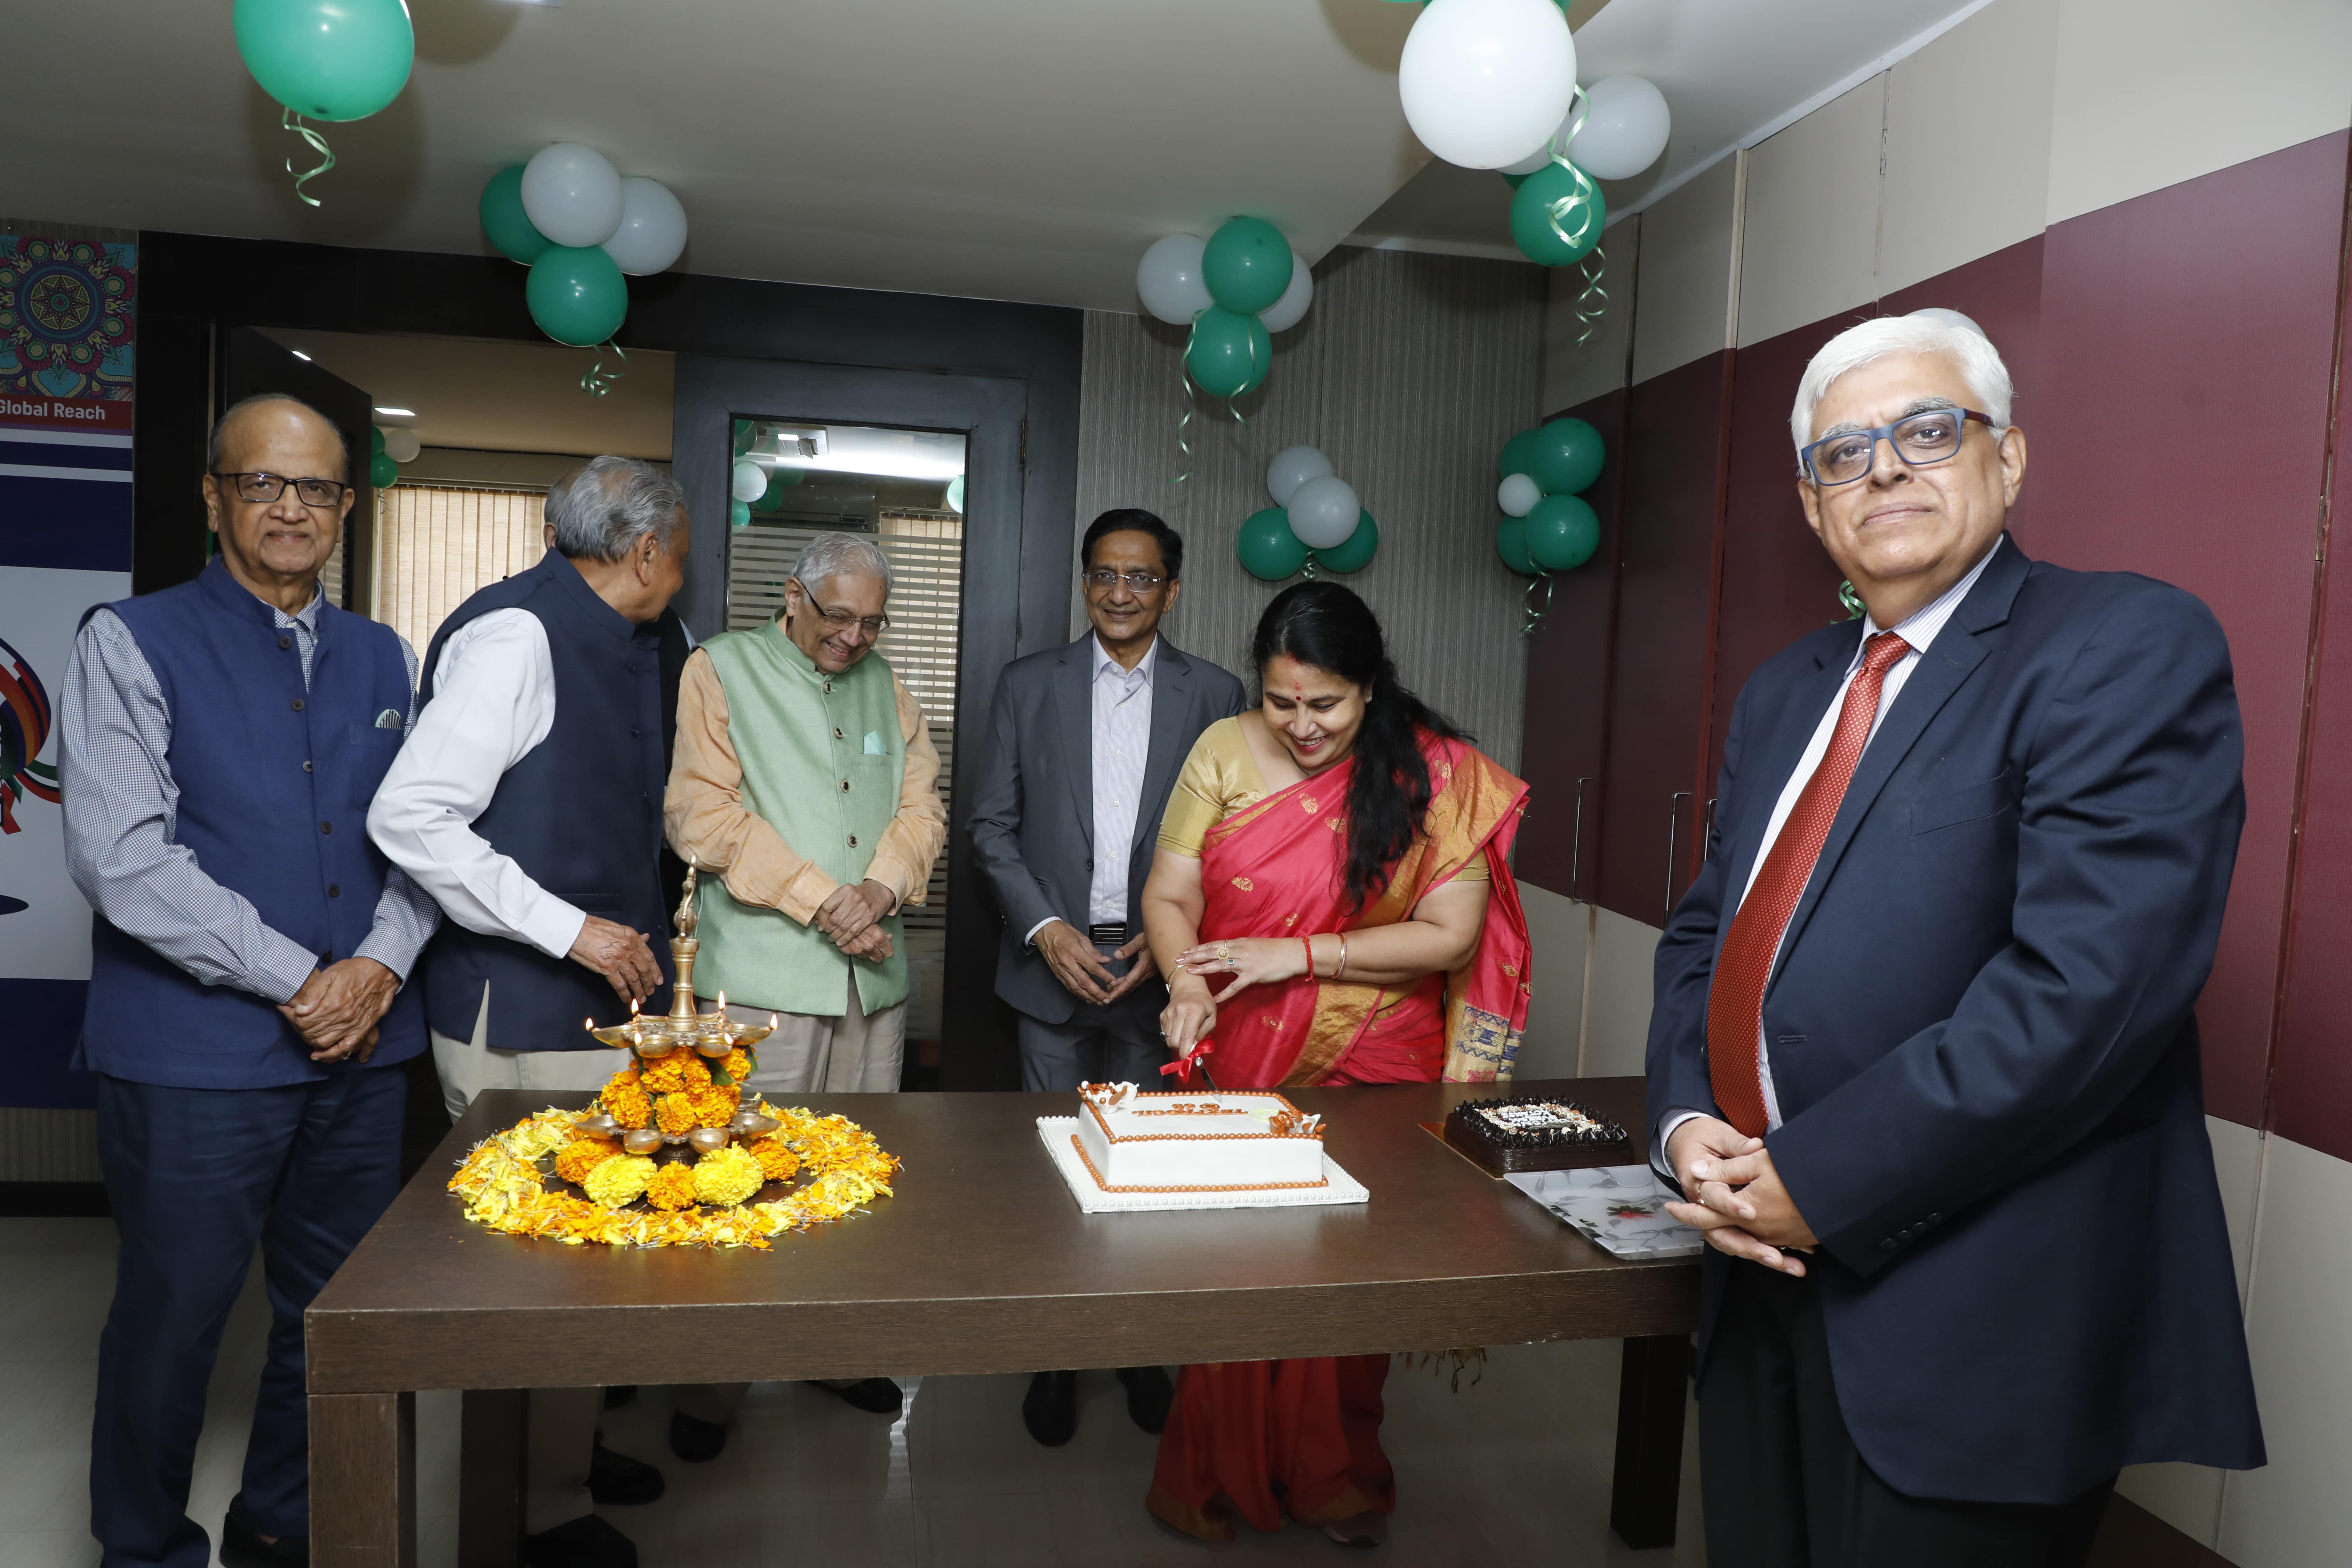 Lighting of Lamp and Cutting of “Commemorative Cake” on the 68th Foundation Day of TEXPROCIL